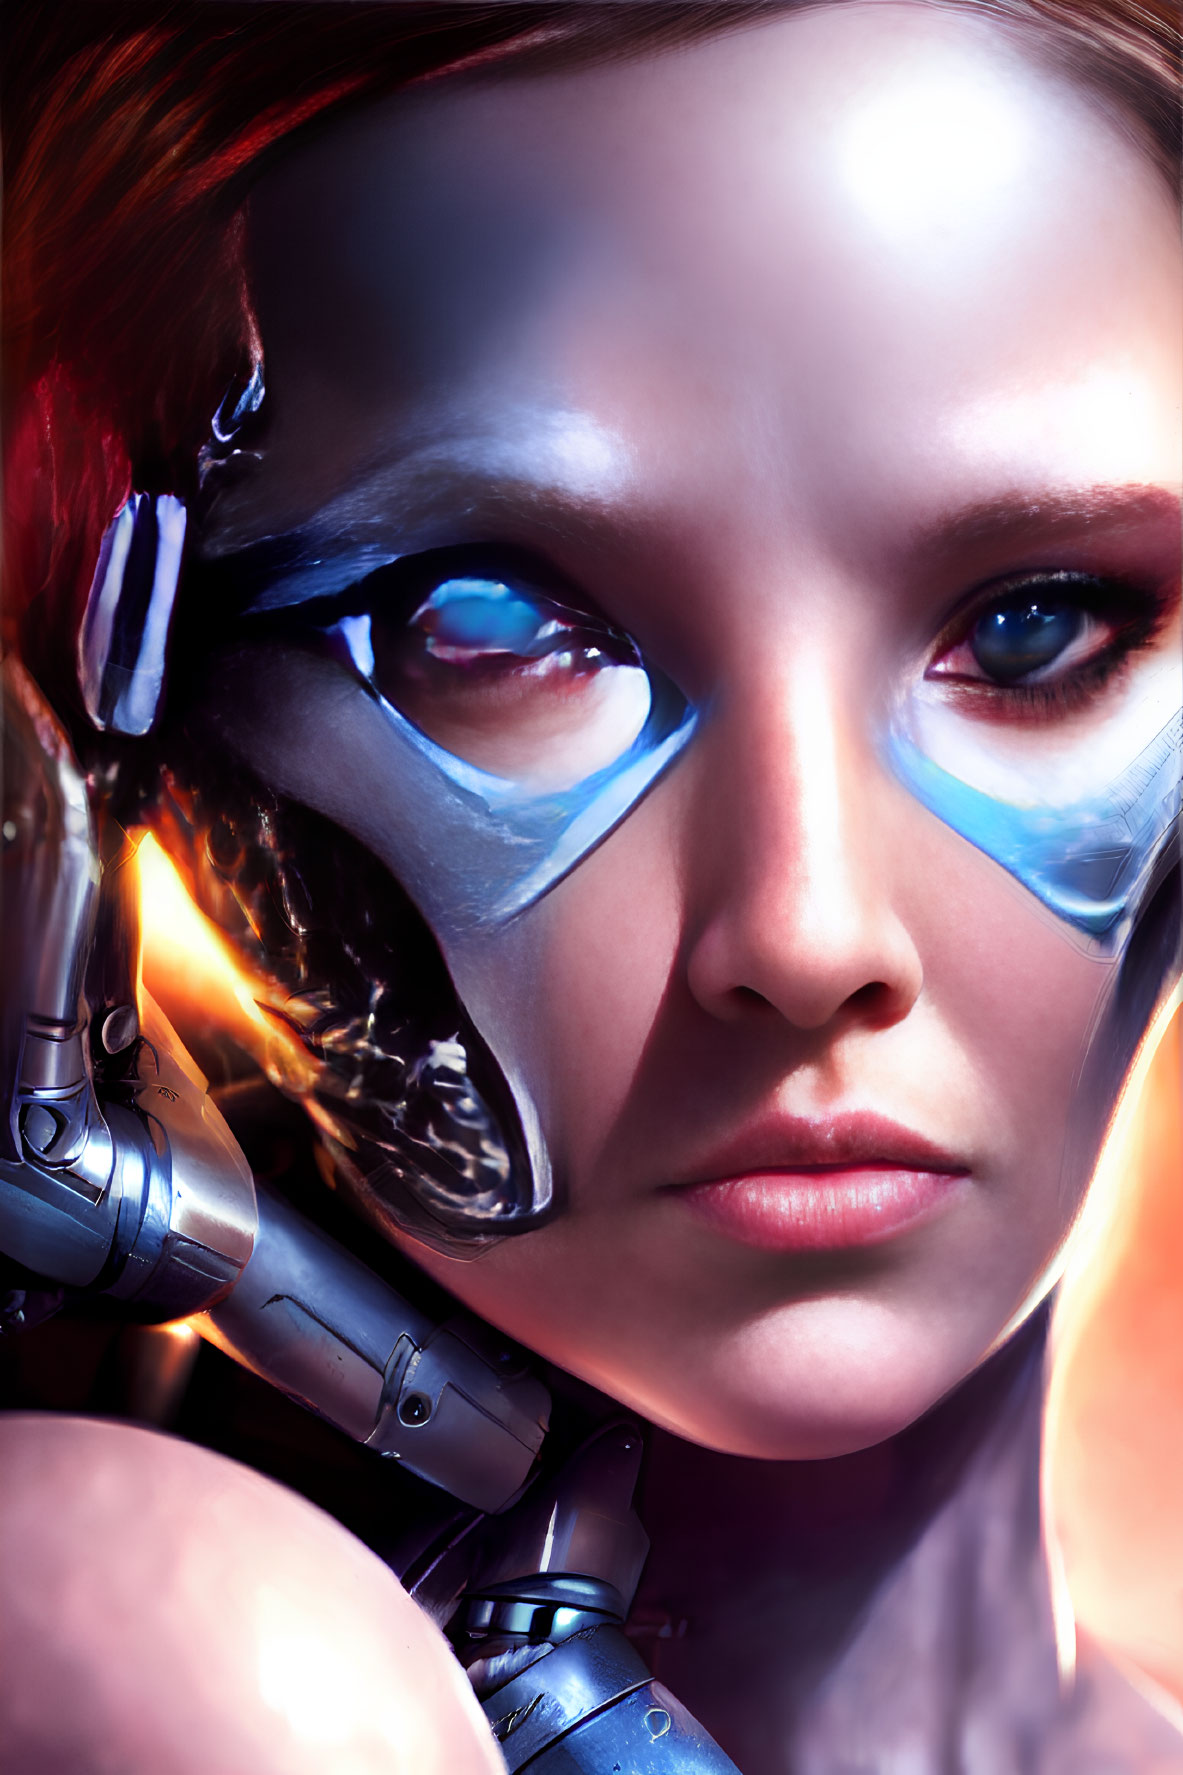 Half-Face Woman with Robotic Features: Metallic Eye and Neck